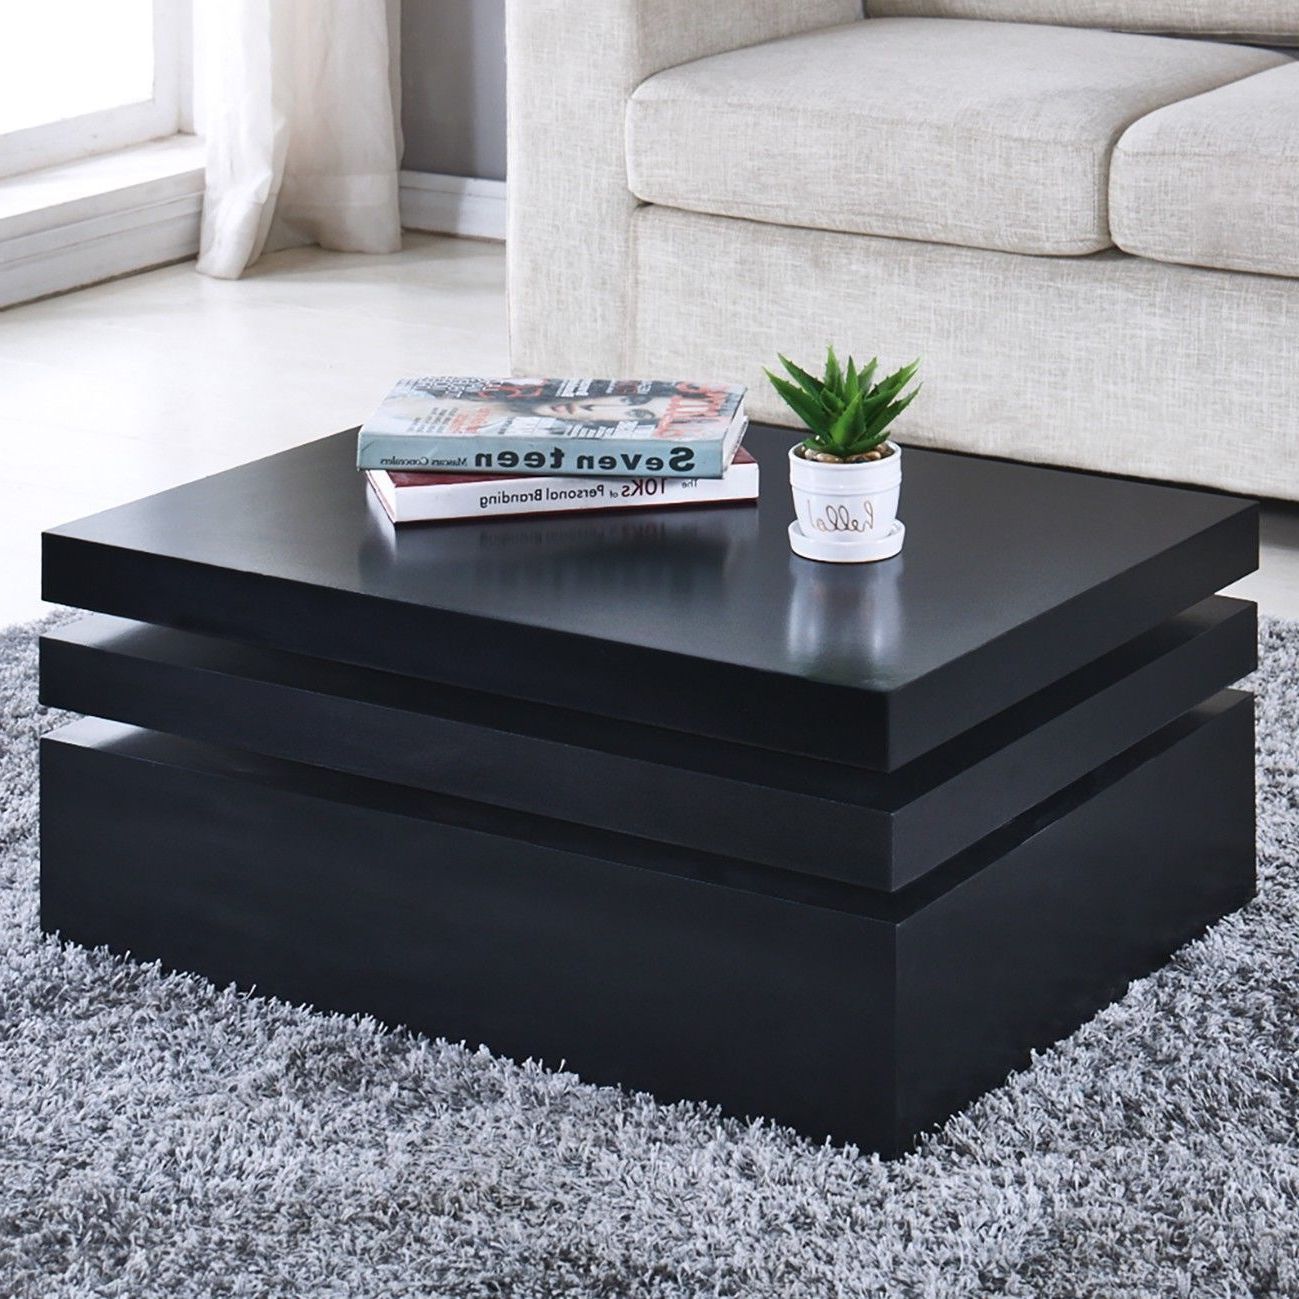 Small Square Coffee Table High Gloss Furniture Modern Pertaining To Most Popular Square High Gloss Coffee Tables (View 8 of 20)